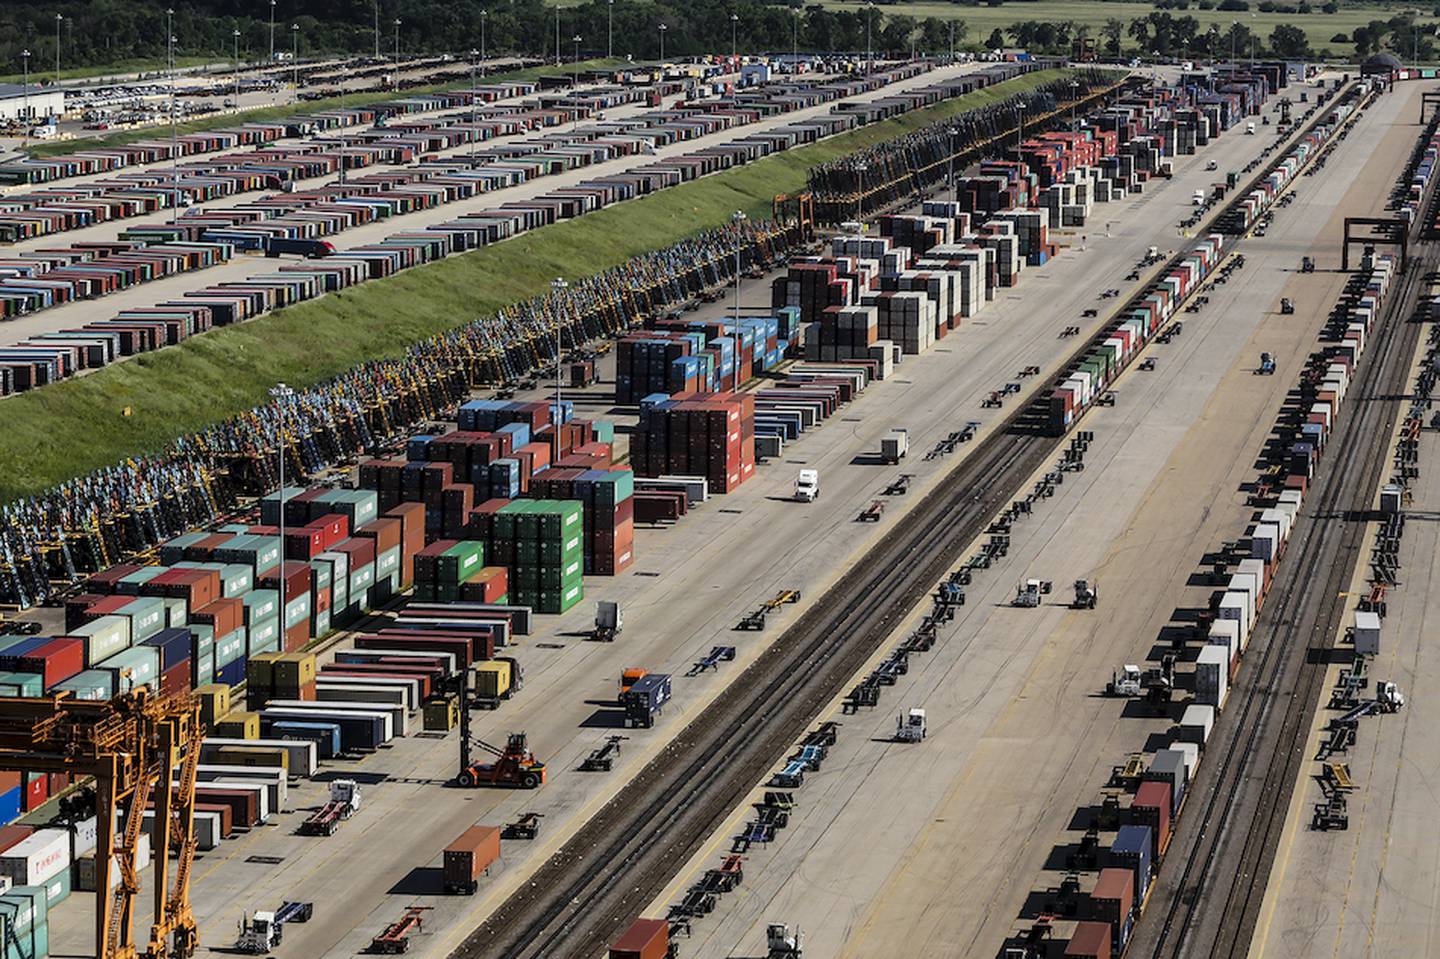 CenterPoint Intermodal in Elwood is seen July 23. The success of developments like the intermodal and the upcoming Michelin distribution center has led to increased truck traffic on area roads and interstates.